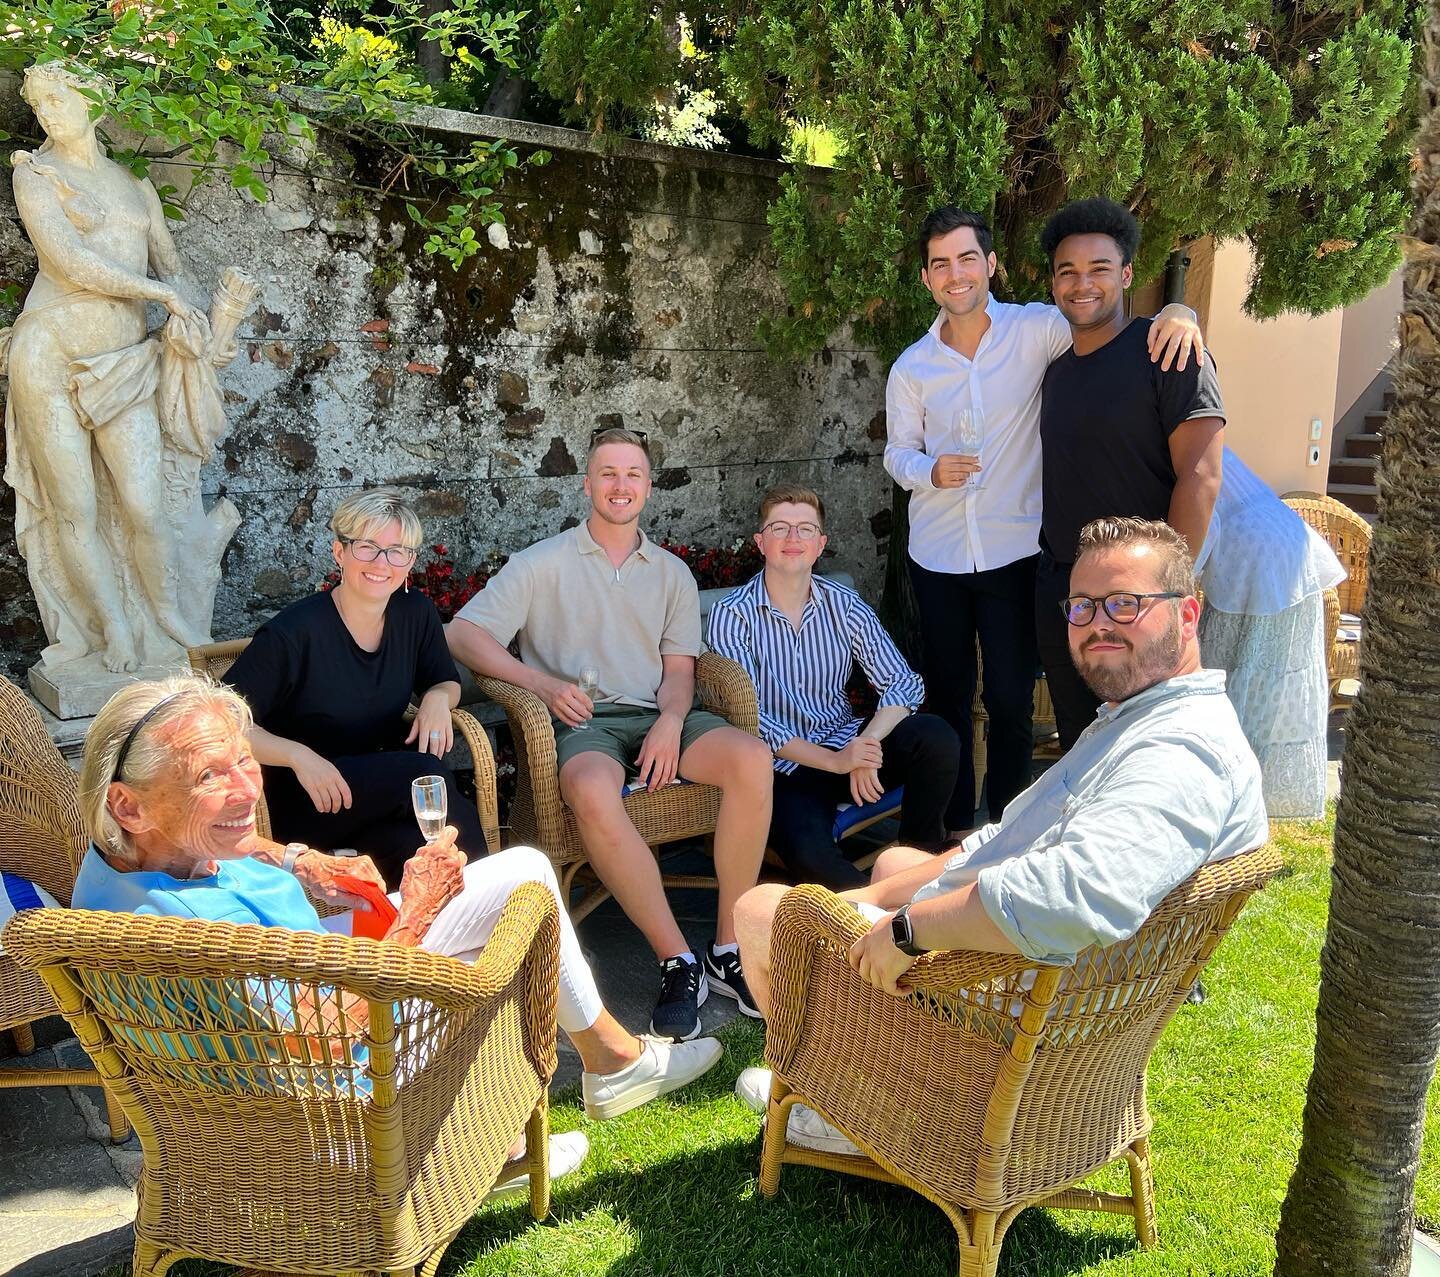 An unforgettable few days in dreamy Morcote making music and many new friends 😌

A massive thank you to the ever-wonderful Ursula Jones for being so generous and supportive, and to @milosguitar and @benjaminapplbaritone for being so welcoming, inspi